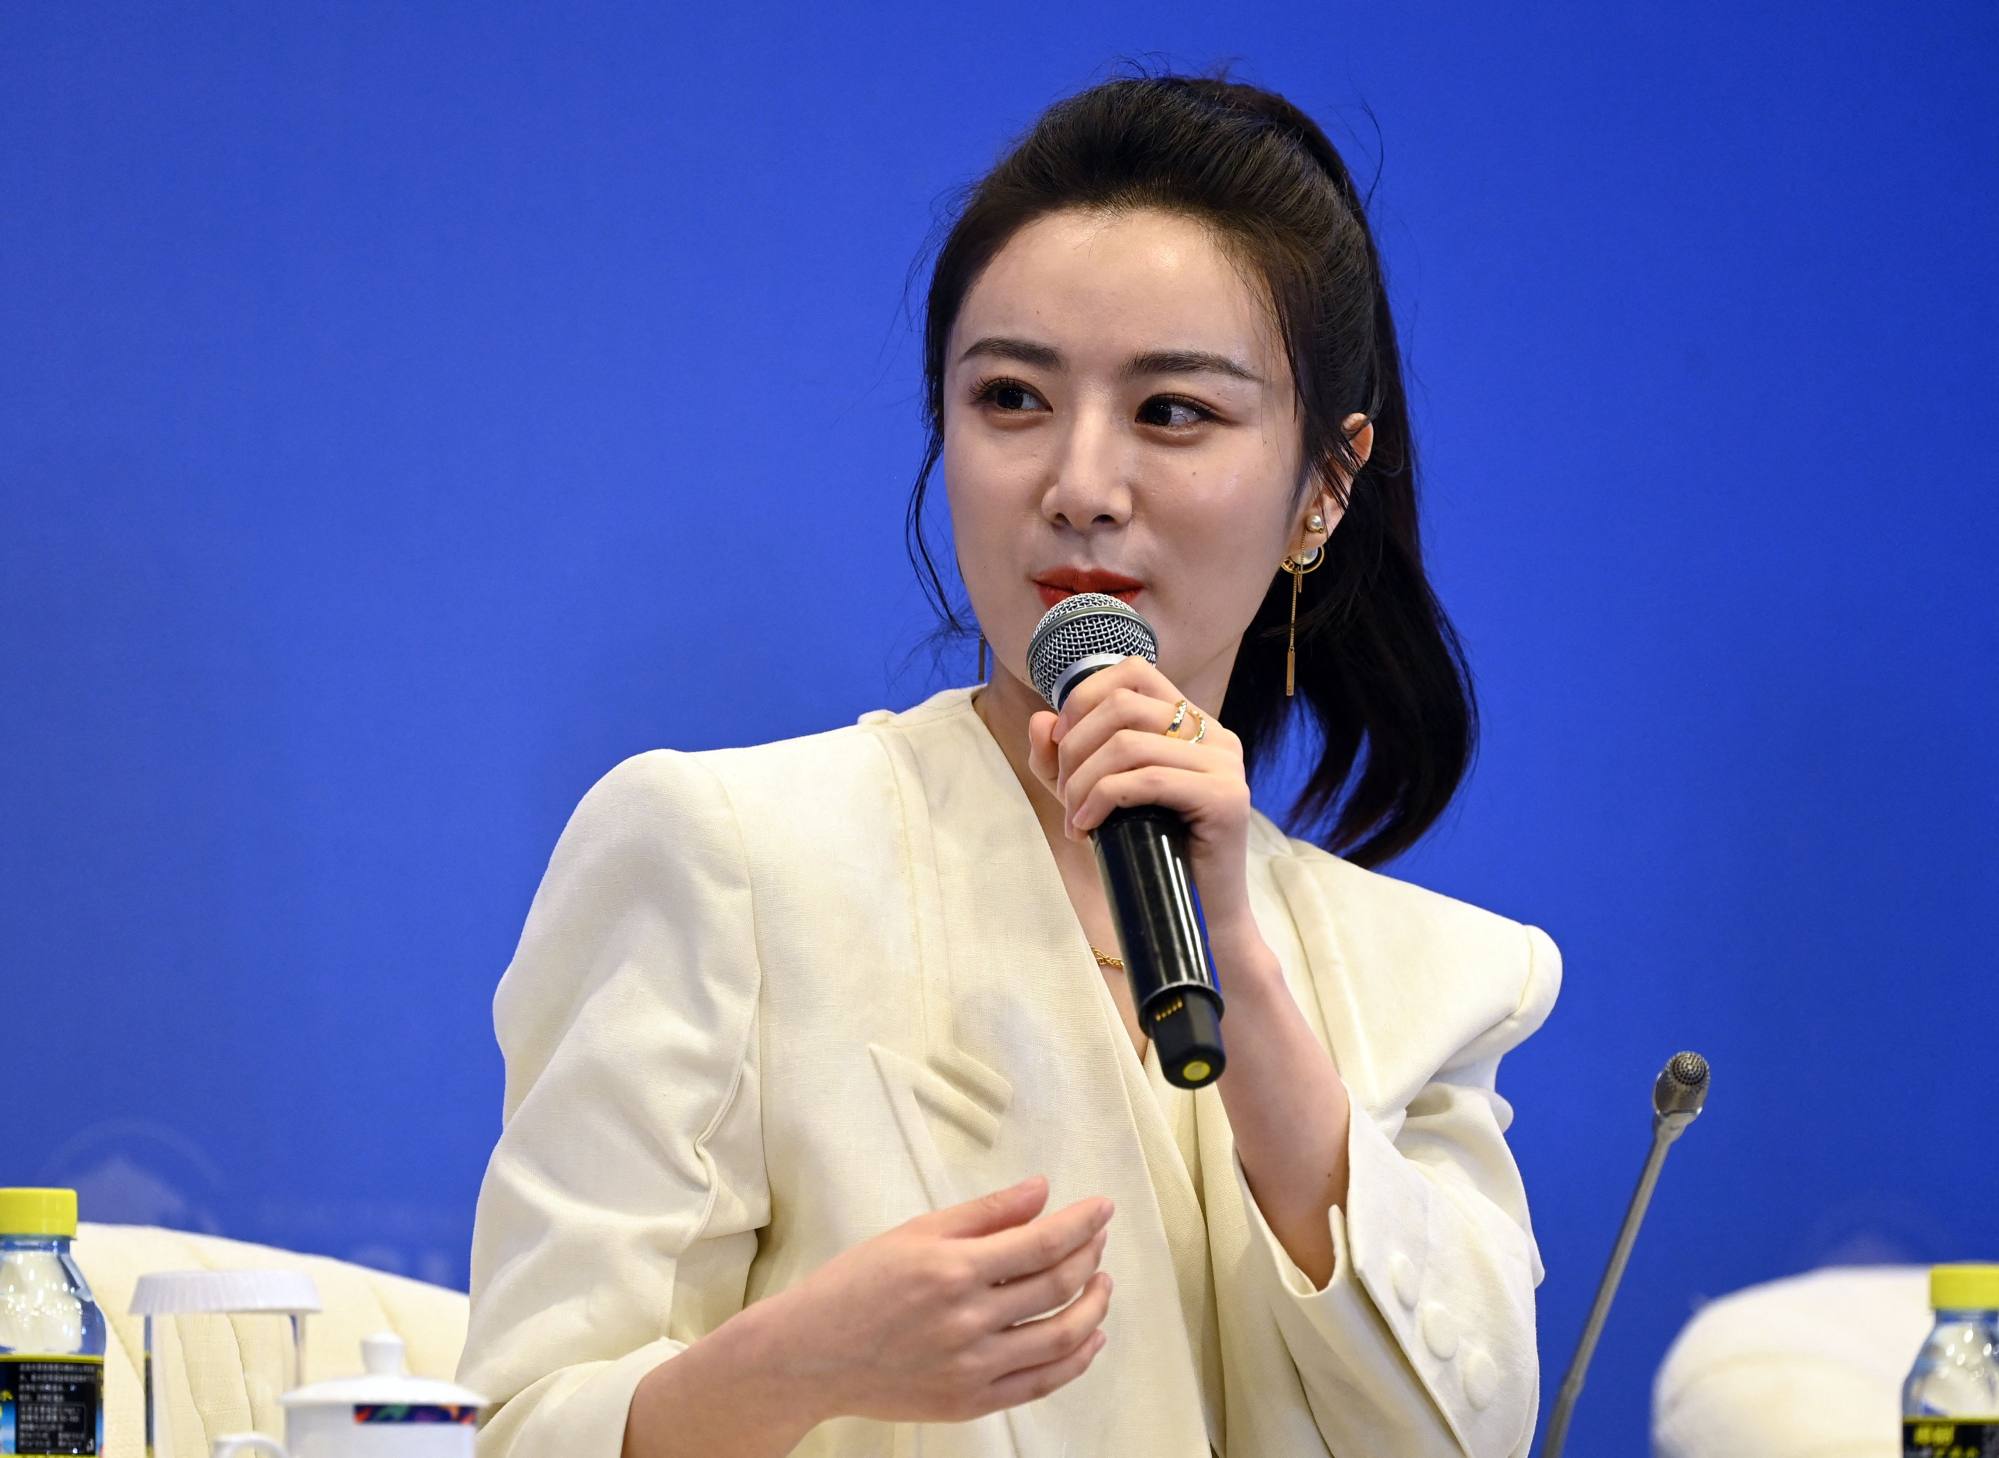 Viya, one of the top live-streaming hosts on Alibaba’s e-commerce platform, was erased from China’s cyberspace after she was accused of tax irregularities. Photo: AFP